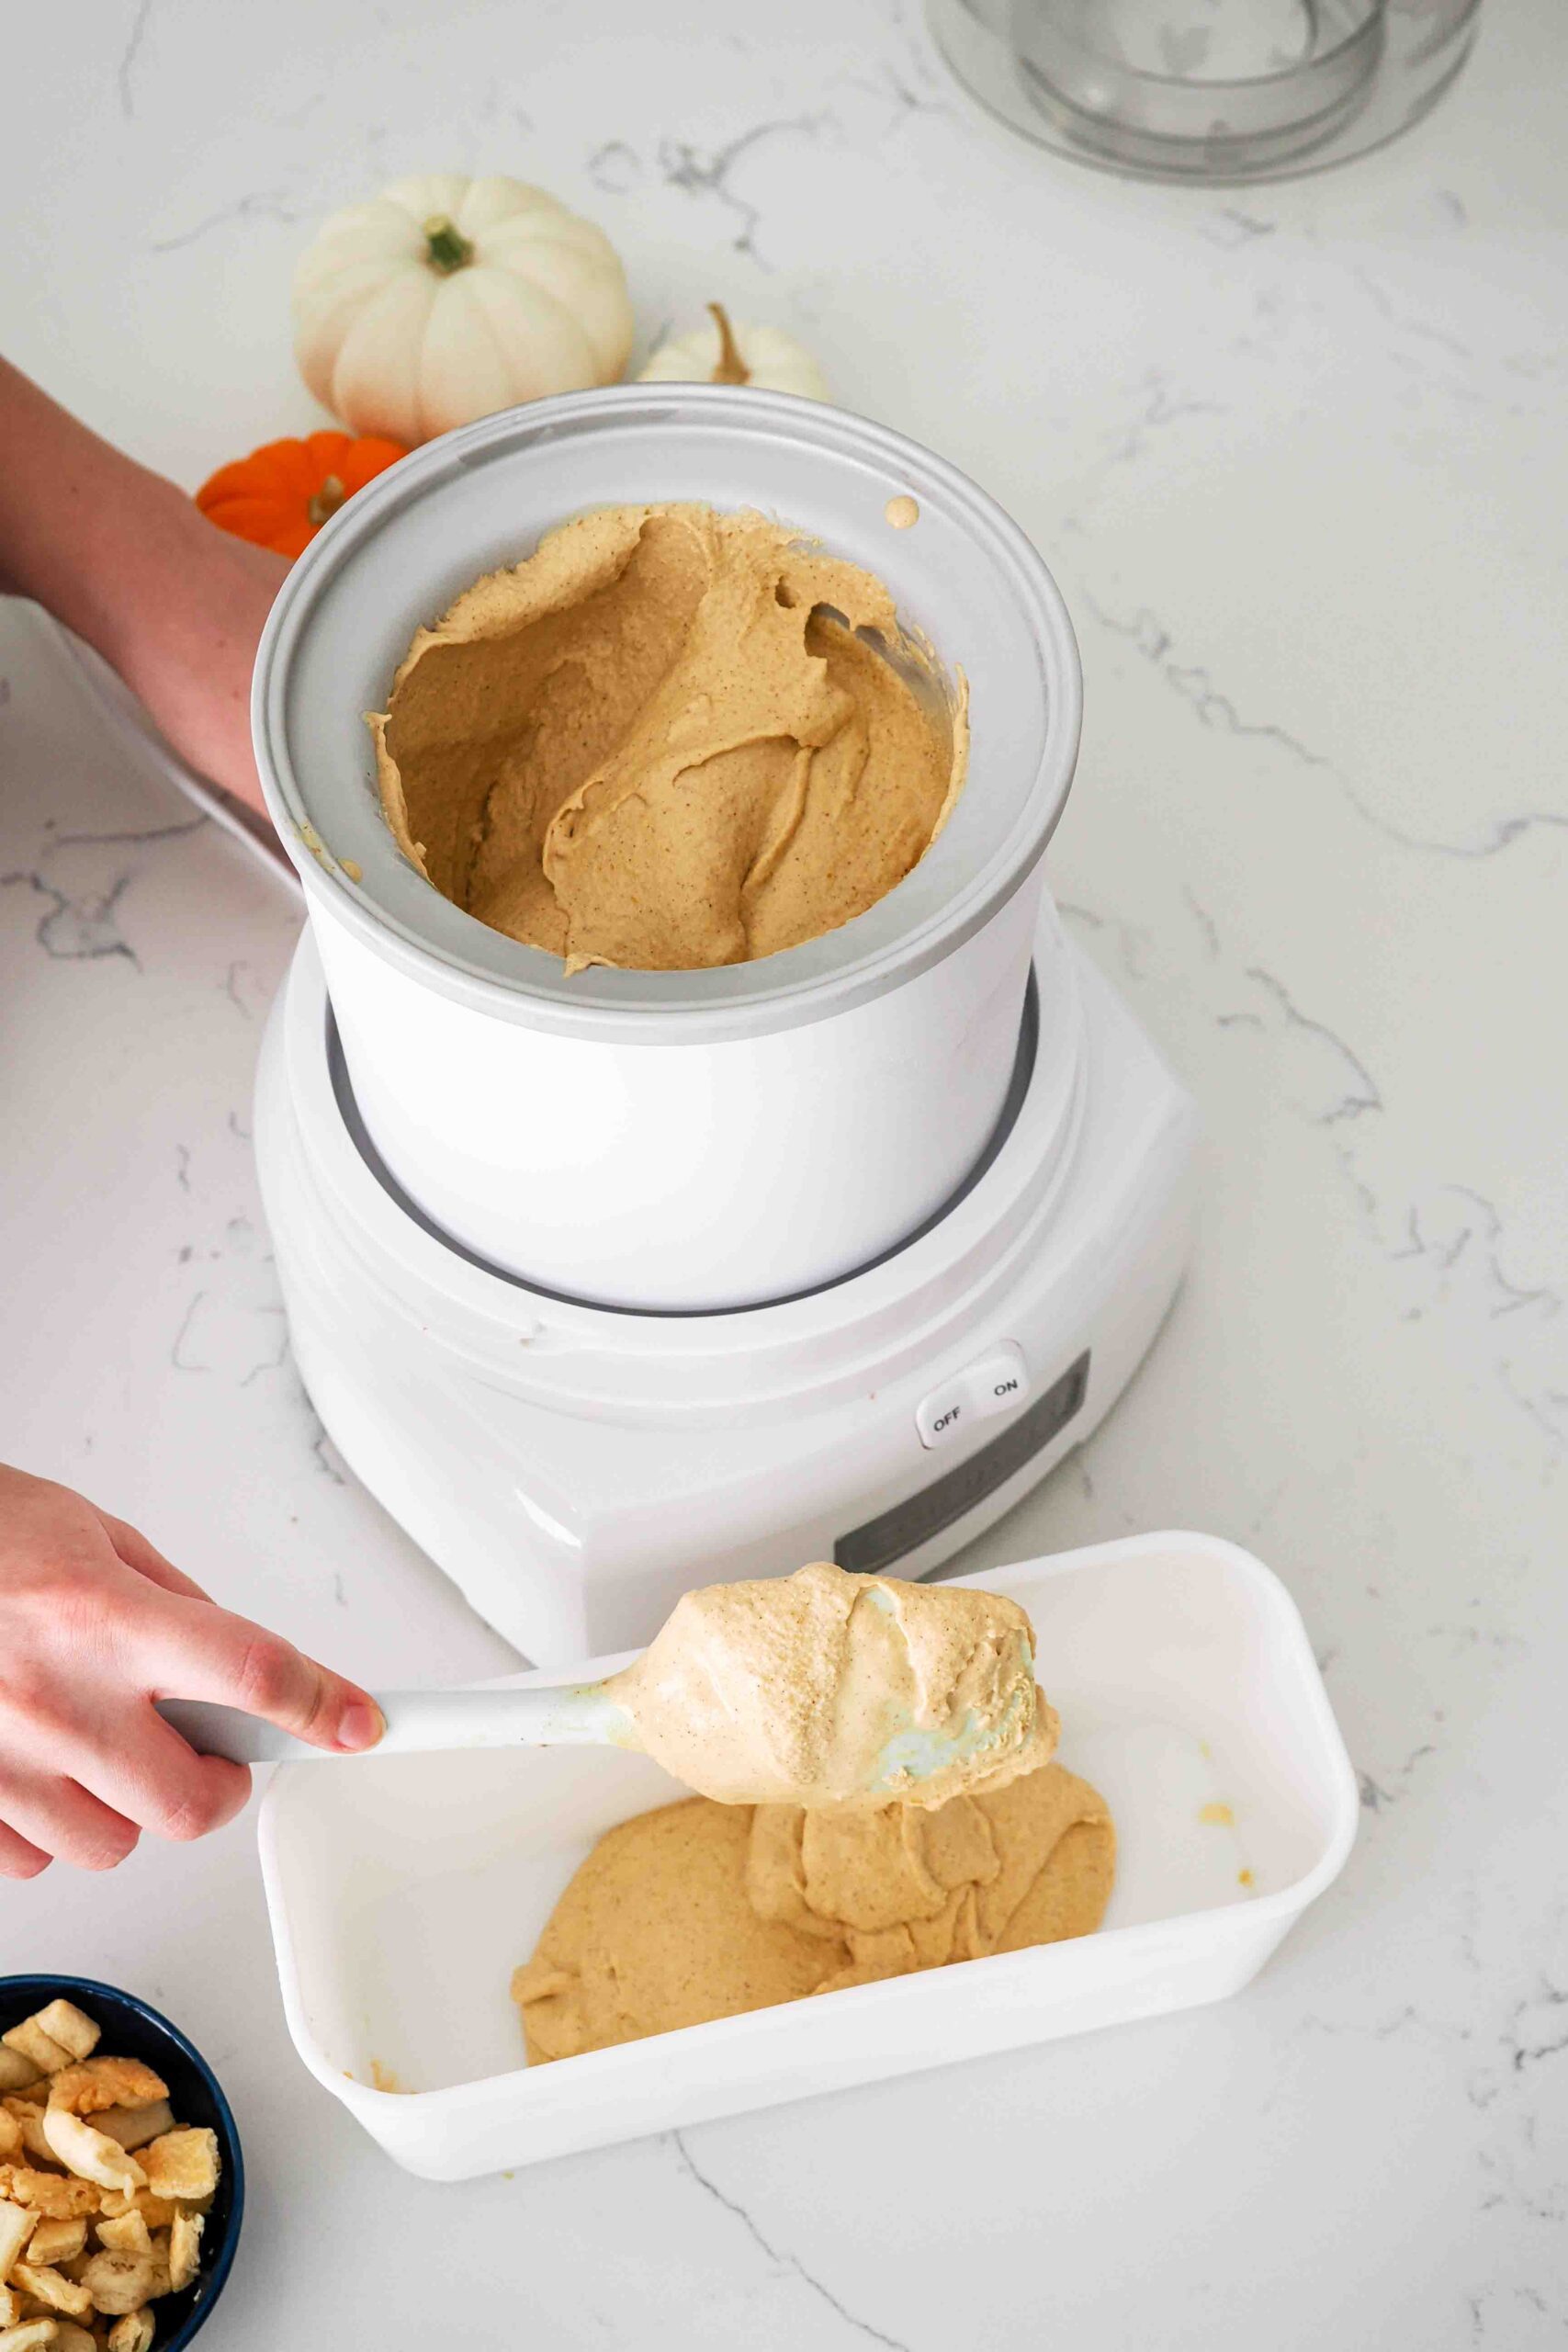 A spatula scoops ice cream out of an ice cream maker and into a storage container.